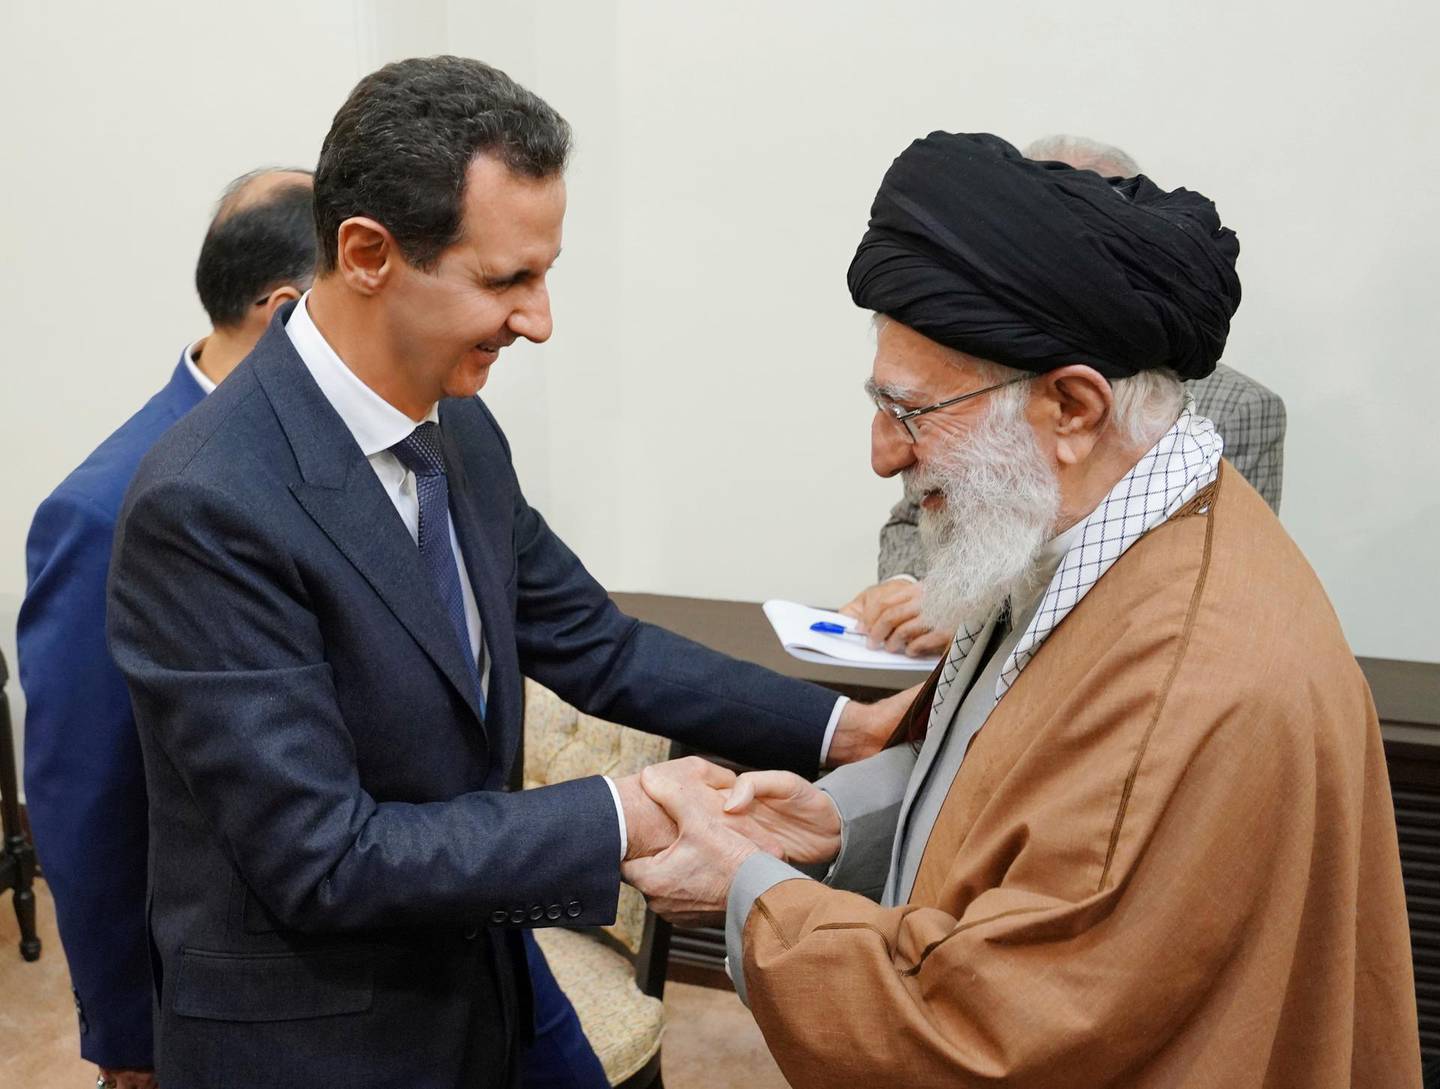 In this photo released by the Syrian official news agency SANA, Syrian President Bashar Assad, left, shakes hands with Iranian Supreme Leader Ayatollah Ali Khamenei, before their meeting in Tehran, Syria, Monday, Feb. 25, 2019. SANA said Assad met with Supreme Leader Ayatollah Ali Khamenei and President Hassan Rouhani on the trip, the first time he has traveled anywhere other than Russia since the Syrian civil war erupted nearly eight years ago. (SANA via AP)